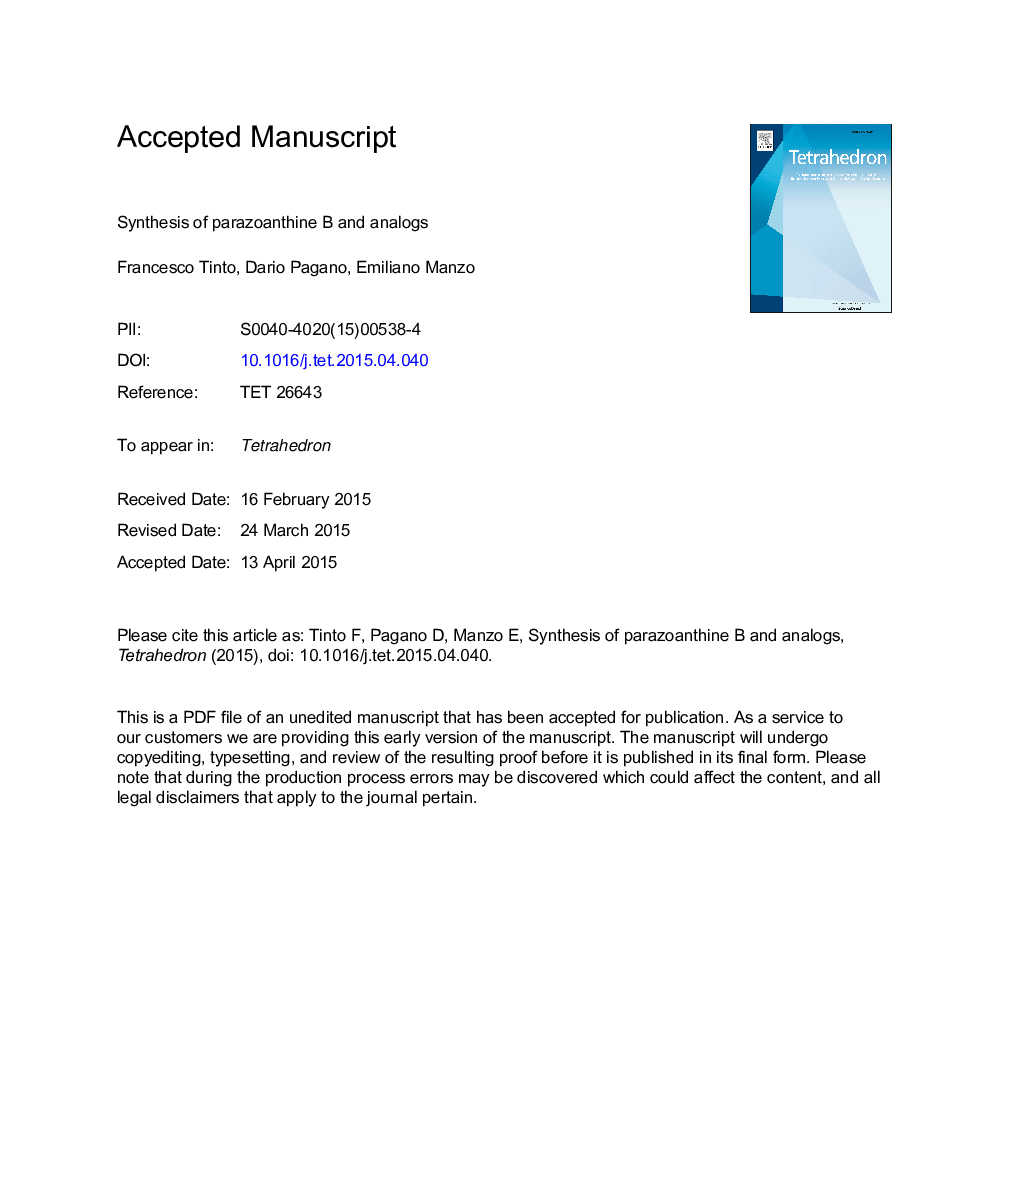 Synthesis of parazoanthine B and analogs